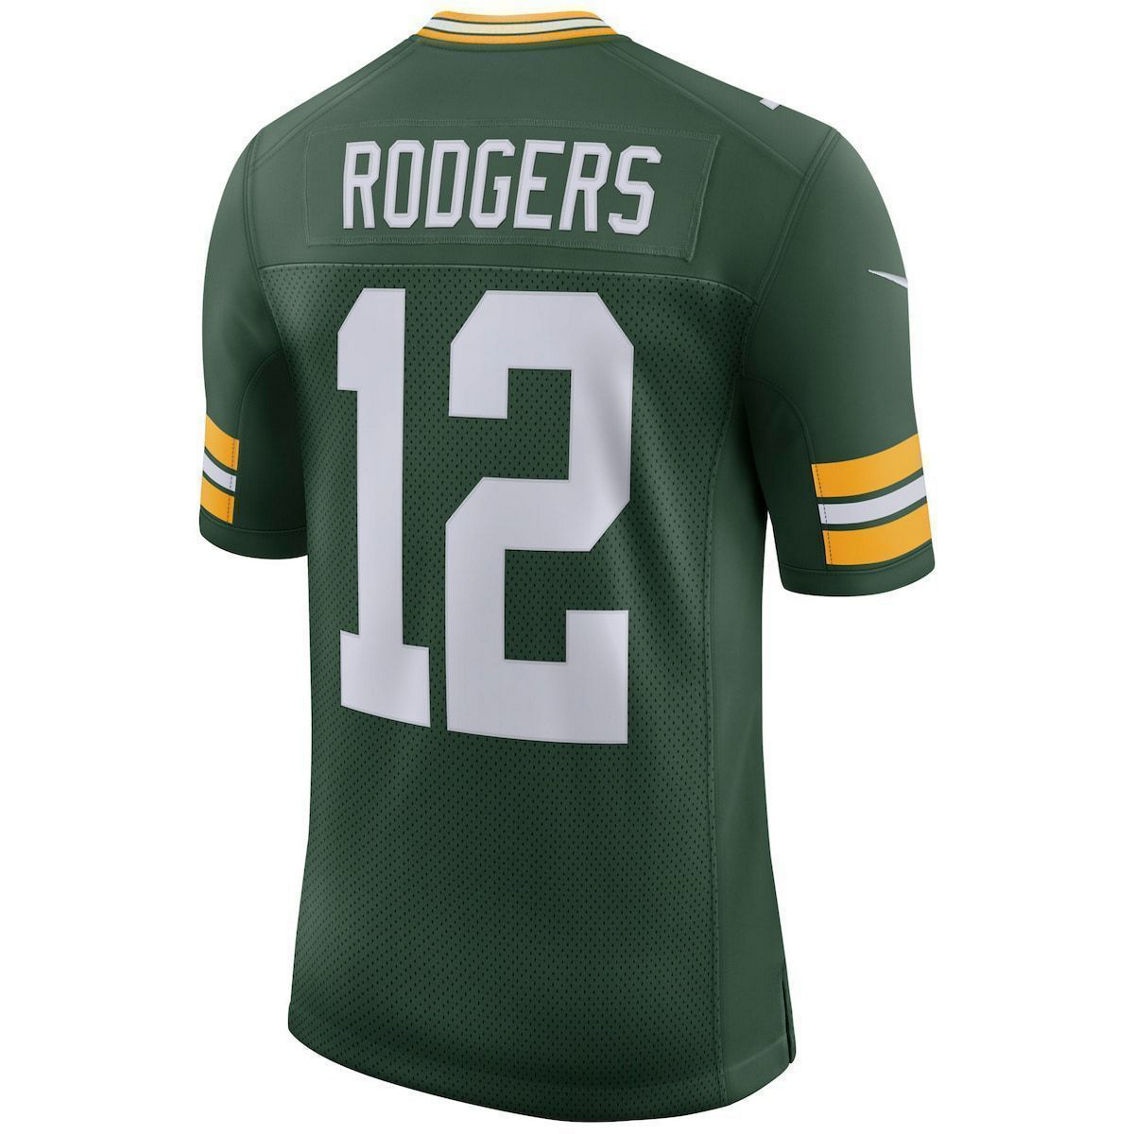 Nike Men's Aaron Rodgers Green Green Bay Packers Classic Limited Player Jersey - Image 4 of 4